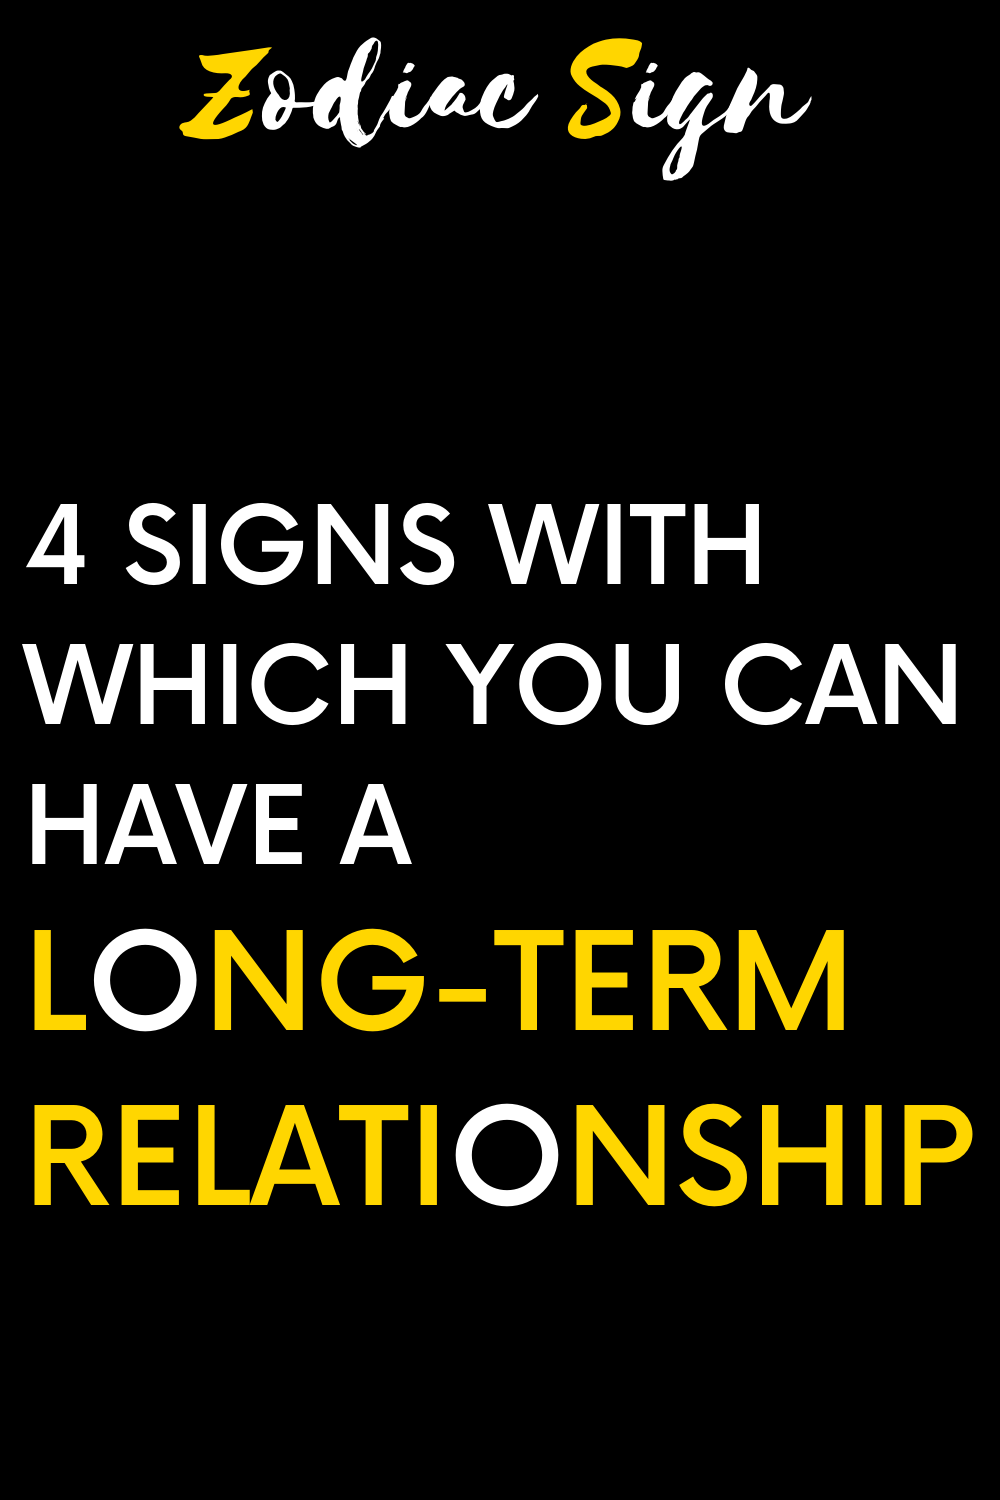 4 signs with which you can have a long-term relationship